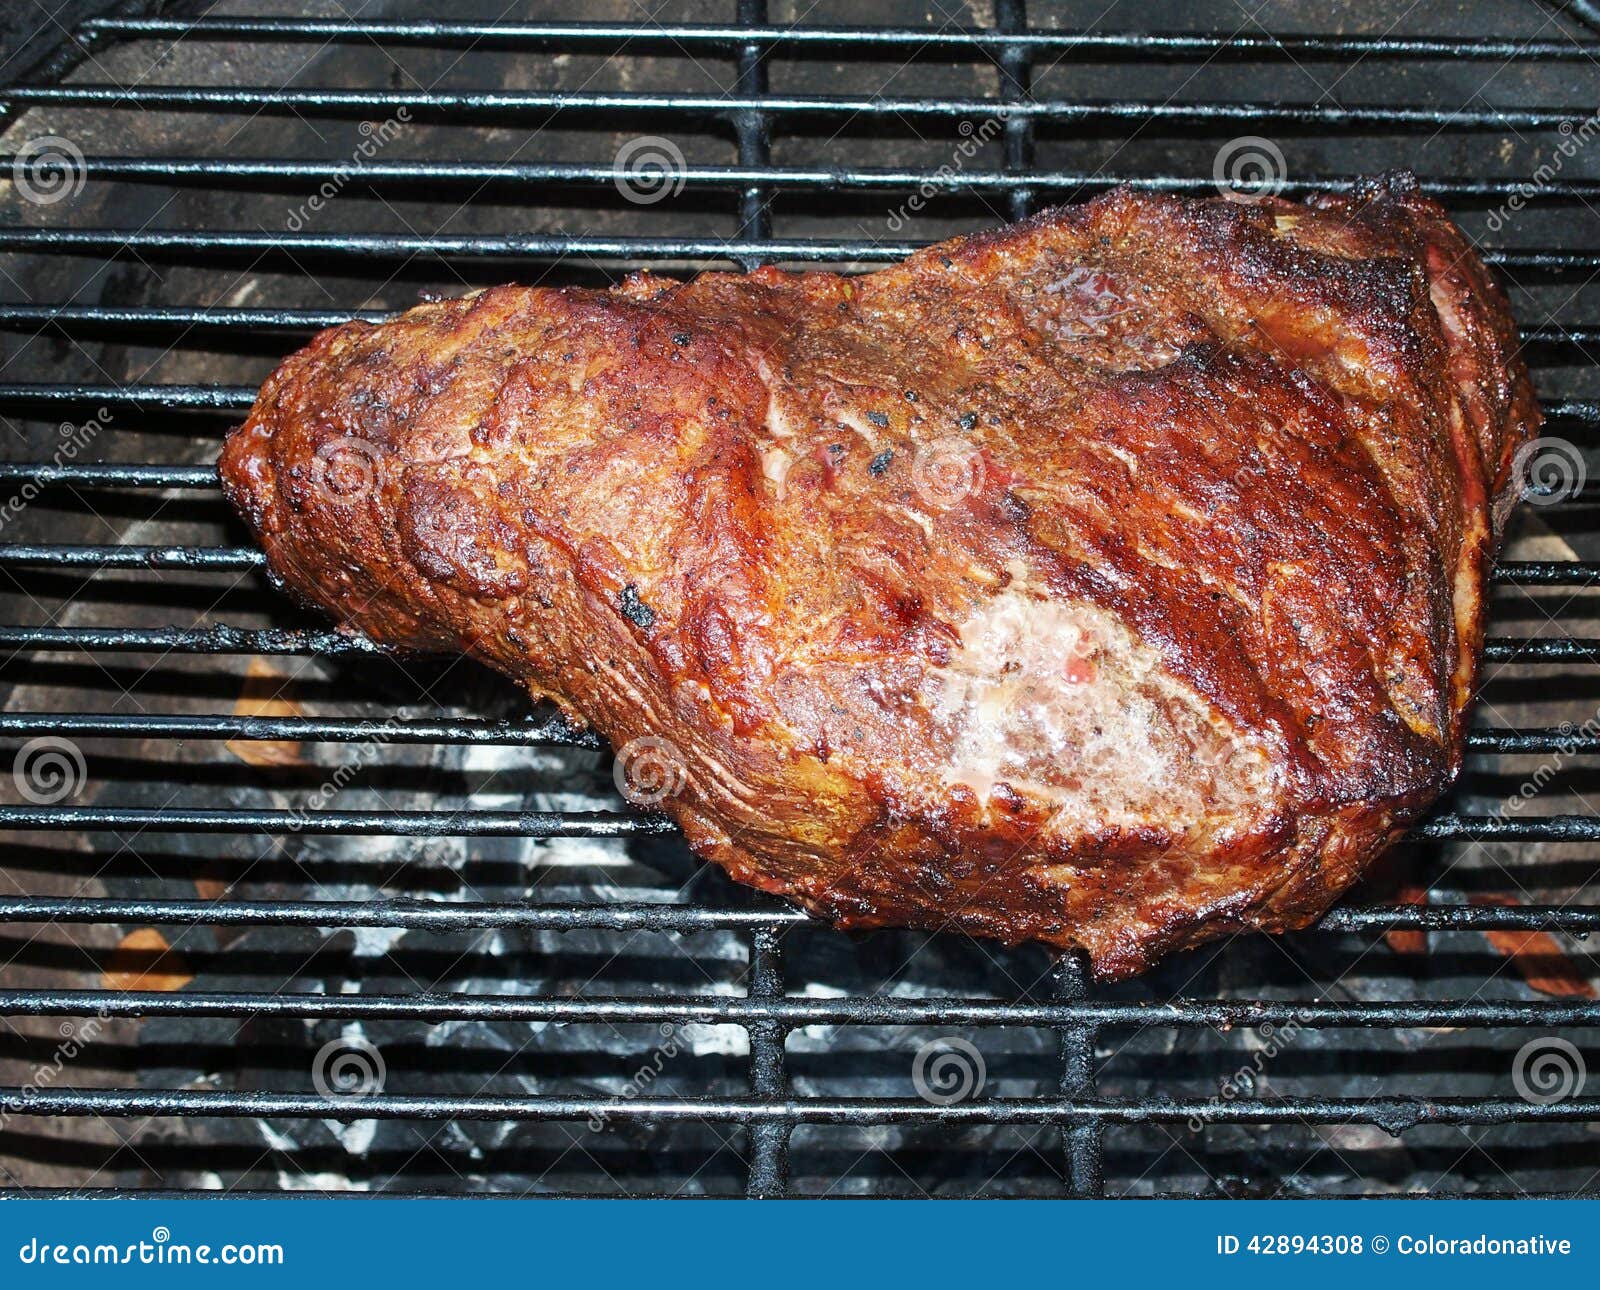 tri tip beef roast on barbeque grill